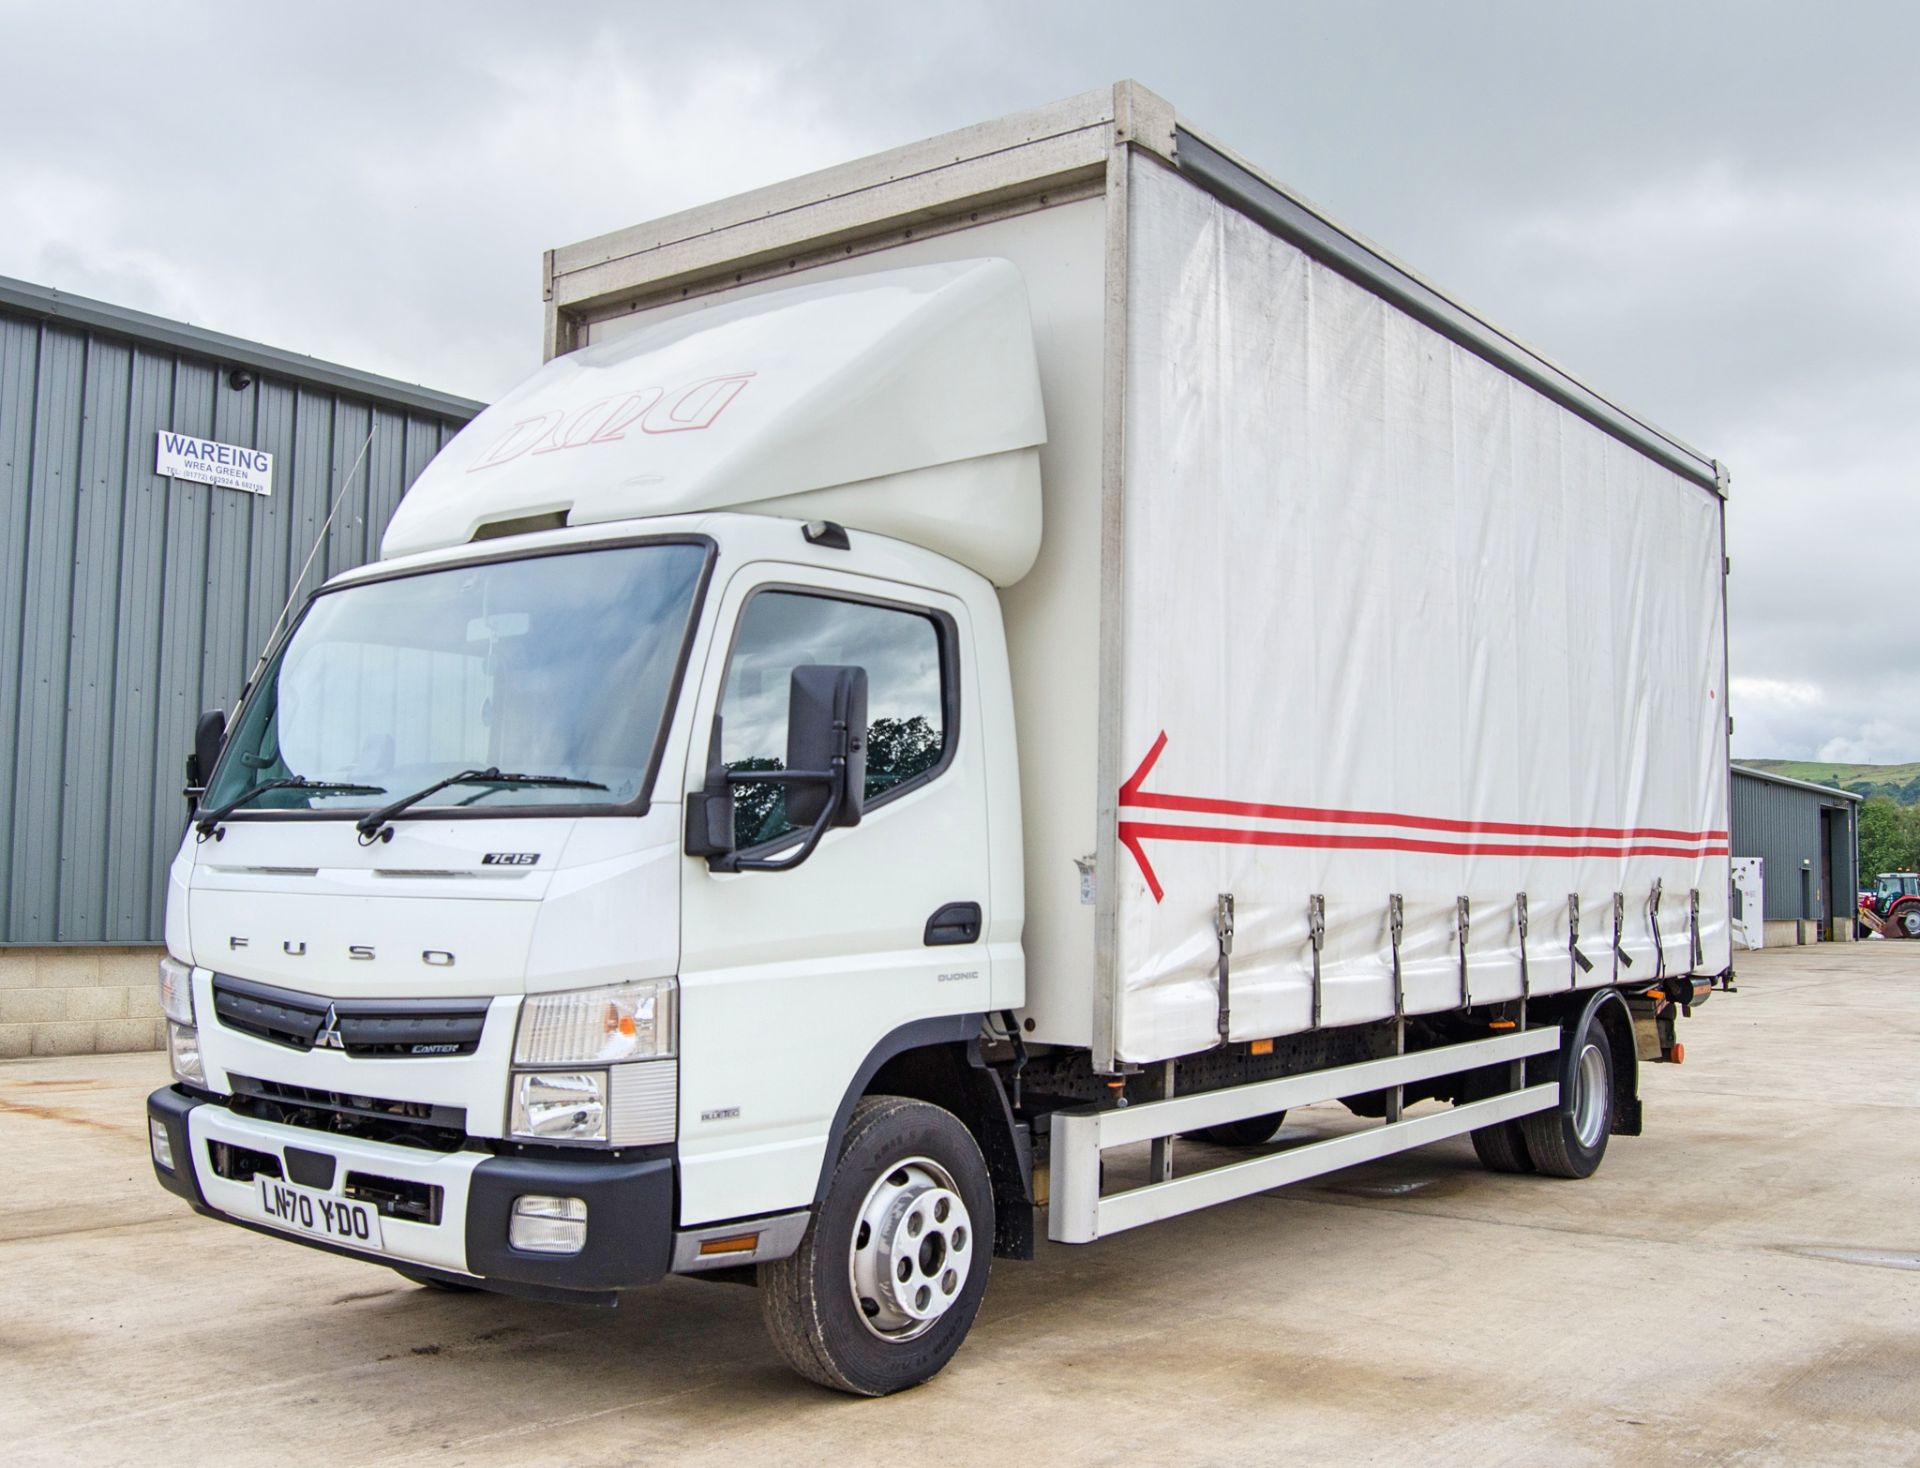 Mitsubishi Fuso Canter 7C15 Duonic 7.5 tonne automatic curtain sided lorry Registration Number: LN70